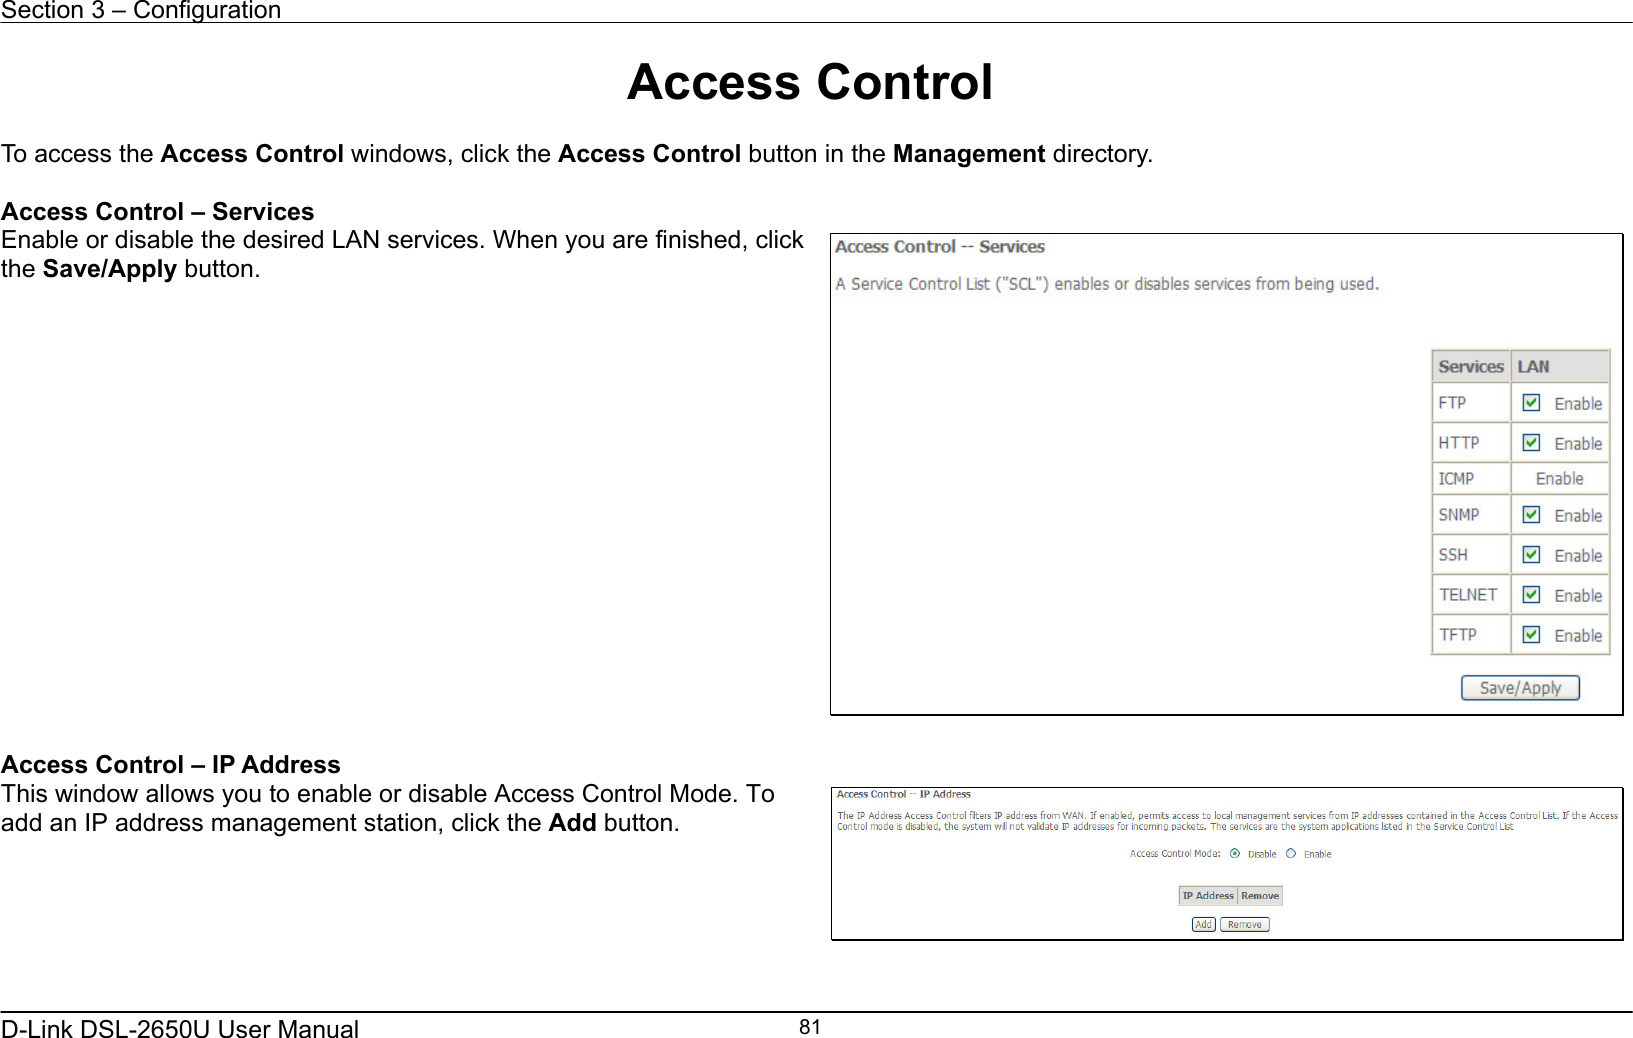 Section 3 – Configuration   D-Link DSL-2650U User Manual    81Access Control  To access the Access Control windows, click the Access Control button in the Management directory.  Access Control – Services Enable or disable the desired LAN services. When you are finished, click the Save/Apply button.   Access Control – IP Address This window allows you to enable or disable Access Control Mode. To add an IP address management station, click the Add button.   